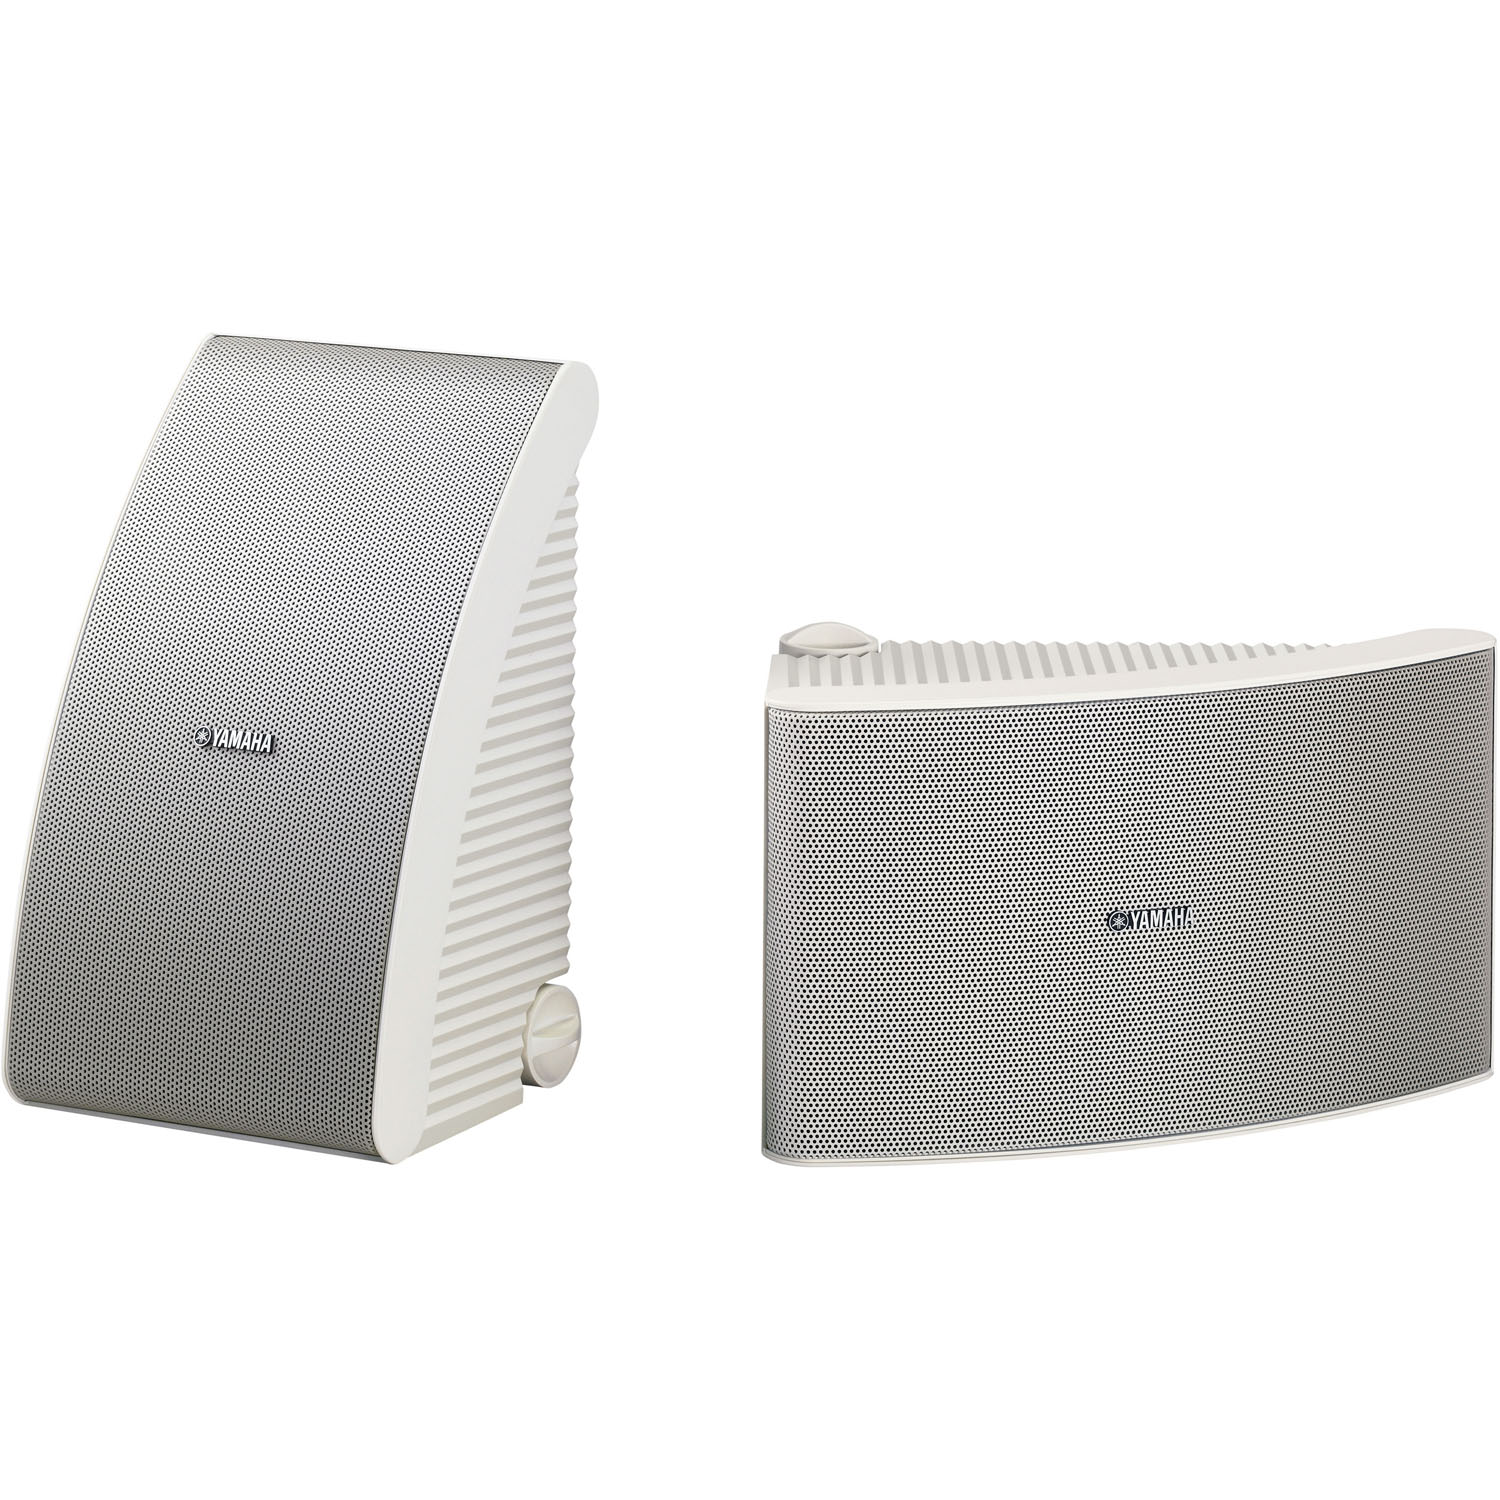 Yamaha NS-AW592W High-Performance All-Weather Indoor/Outdoor 2-Way Speakers (White) (Pair) - image 1 of 4